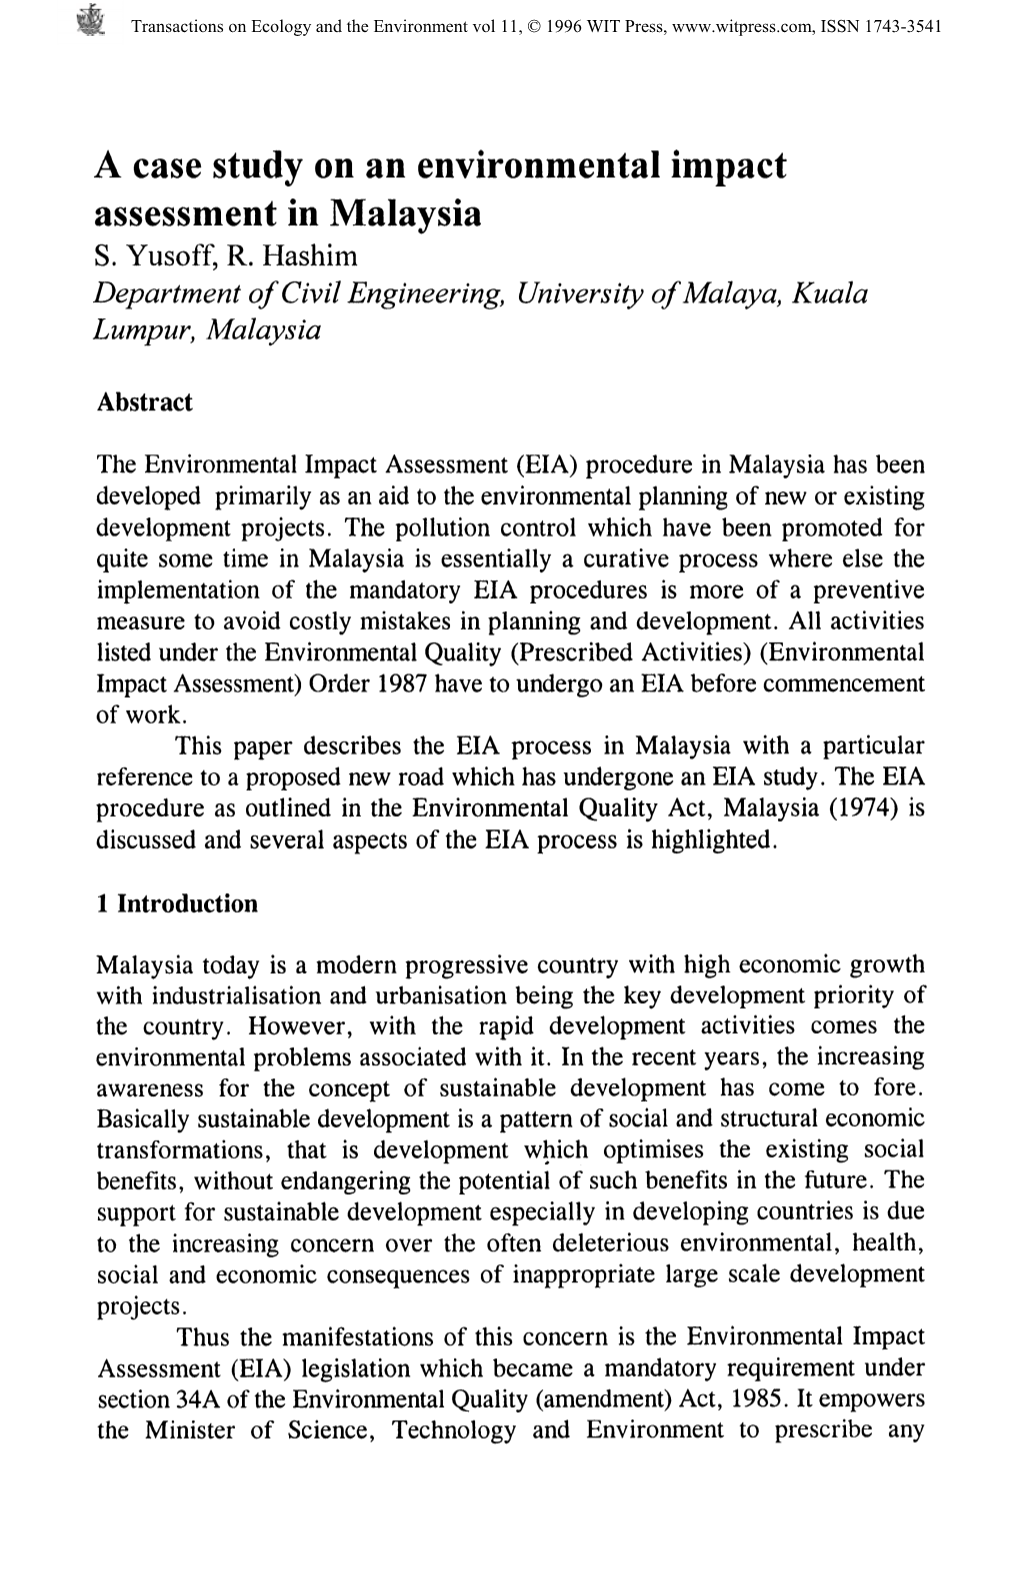 A Case Study on an Environmental Impact Assessment in Malaysia S